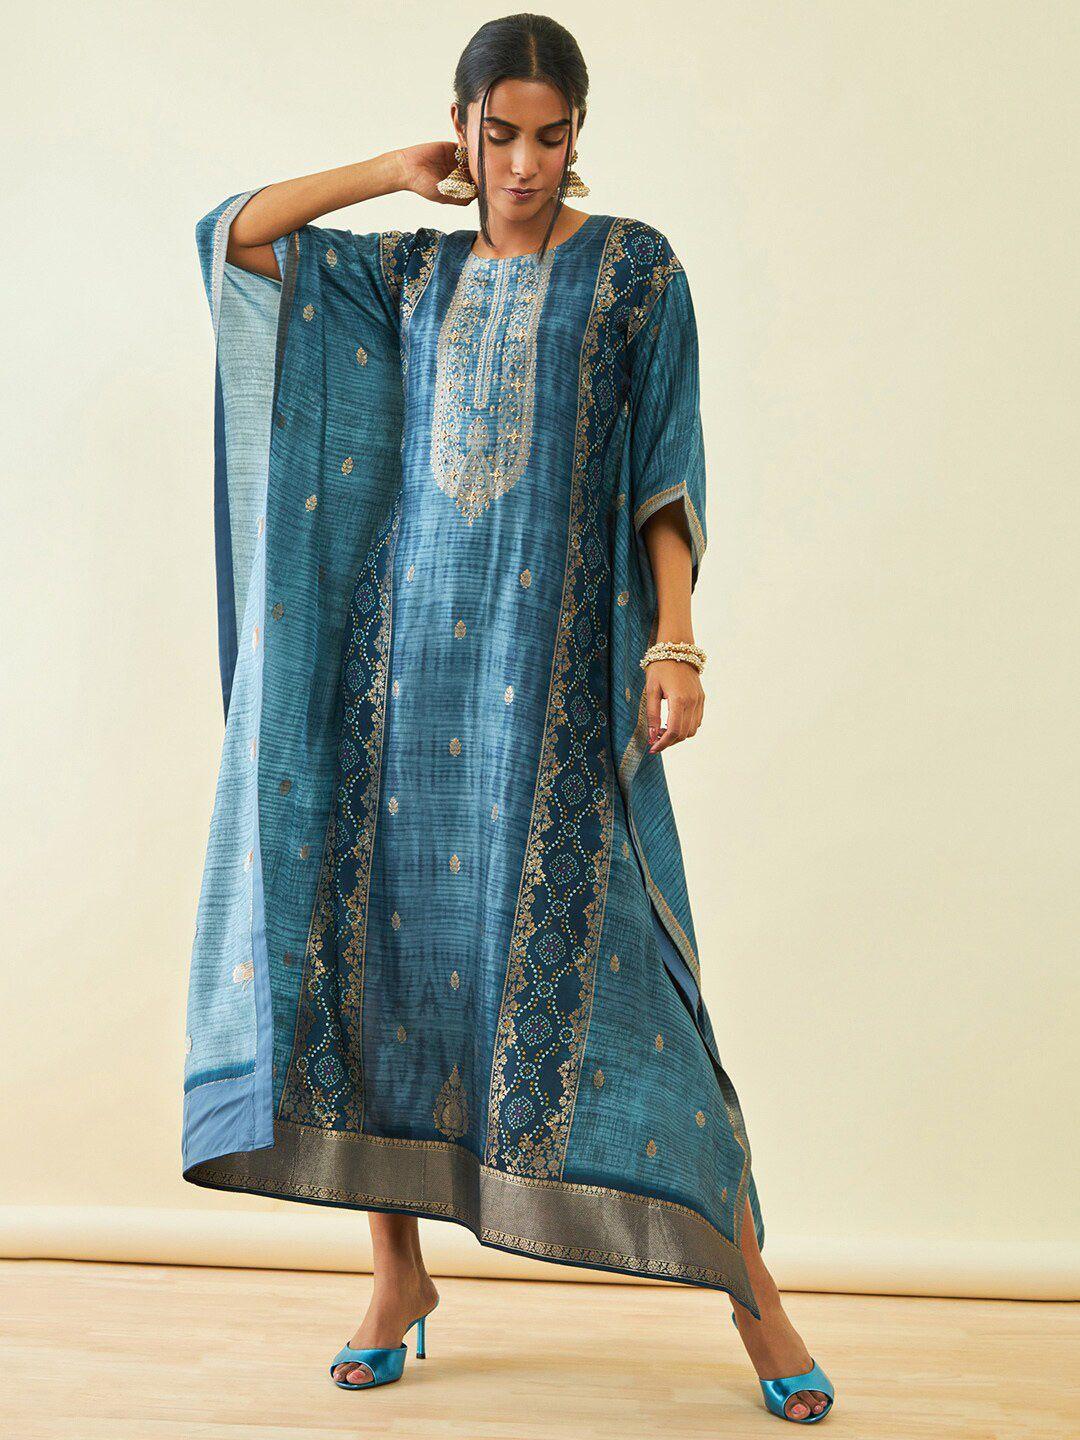 soch brocade bandhani printed with beads & stones kaftan ethnic dress with camisole